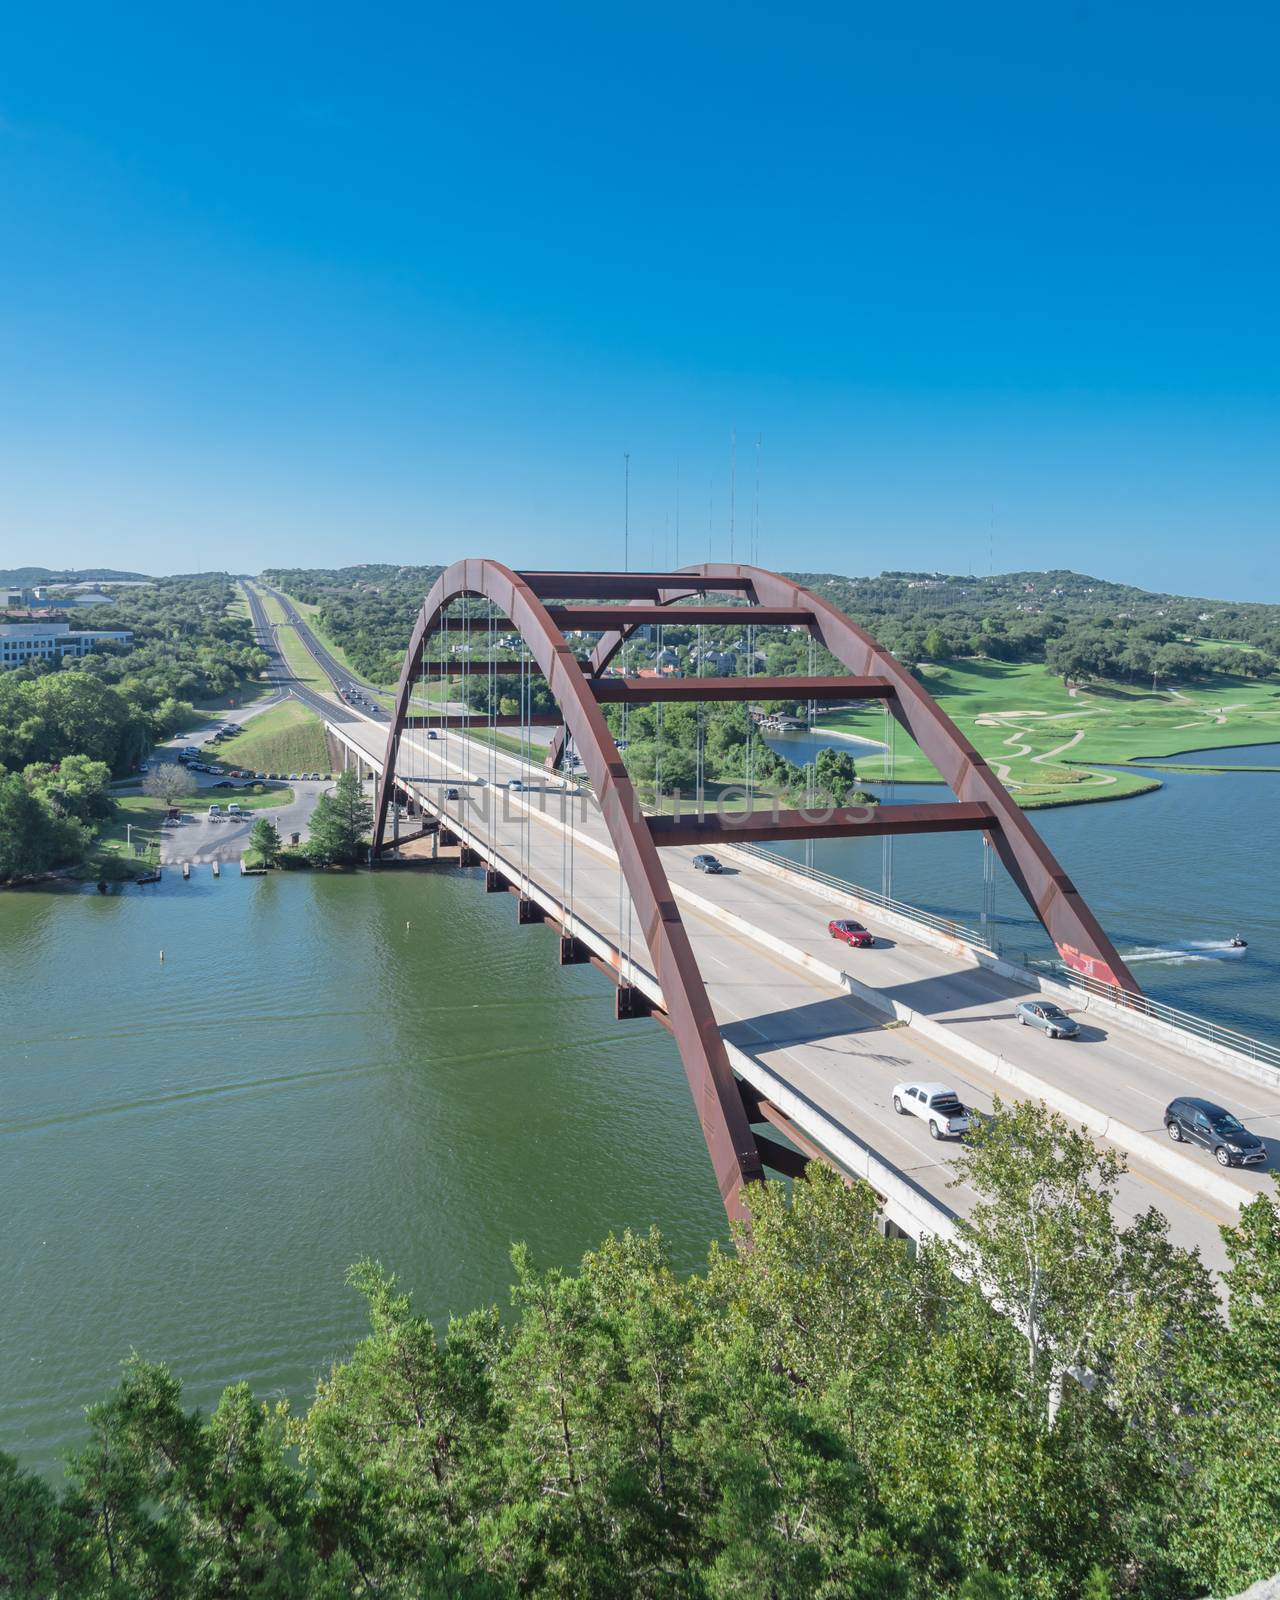 Elevated view of Pennybacker Bridge or 360 Bridge with car traffic at daytime. A landmark in Austin, Texas, USA. Top of Town Lake, Colorado River and Hill Country green landscape